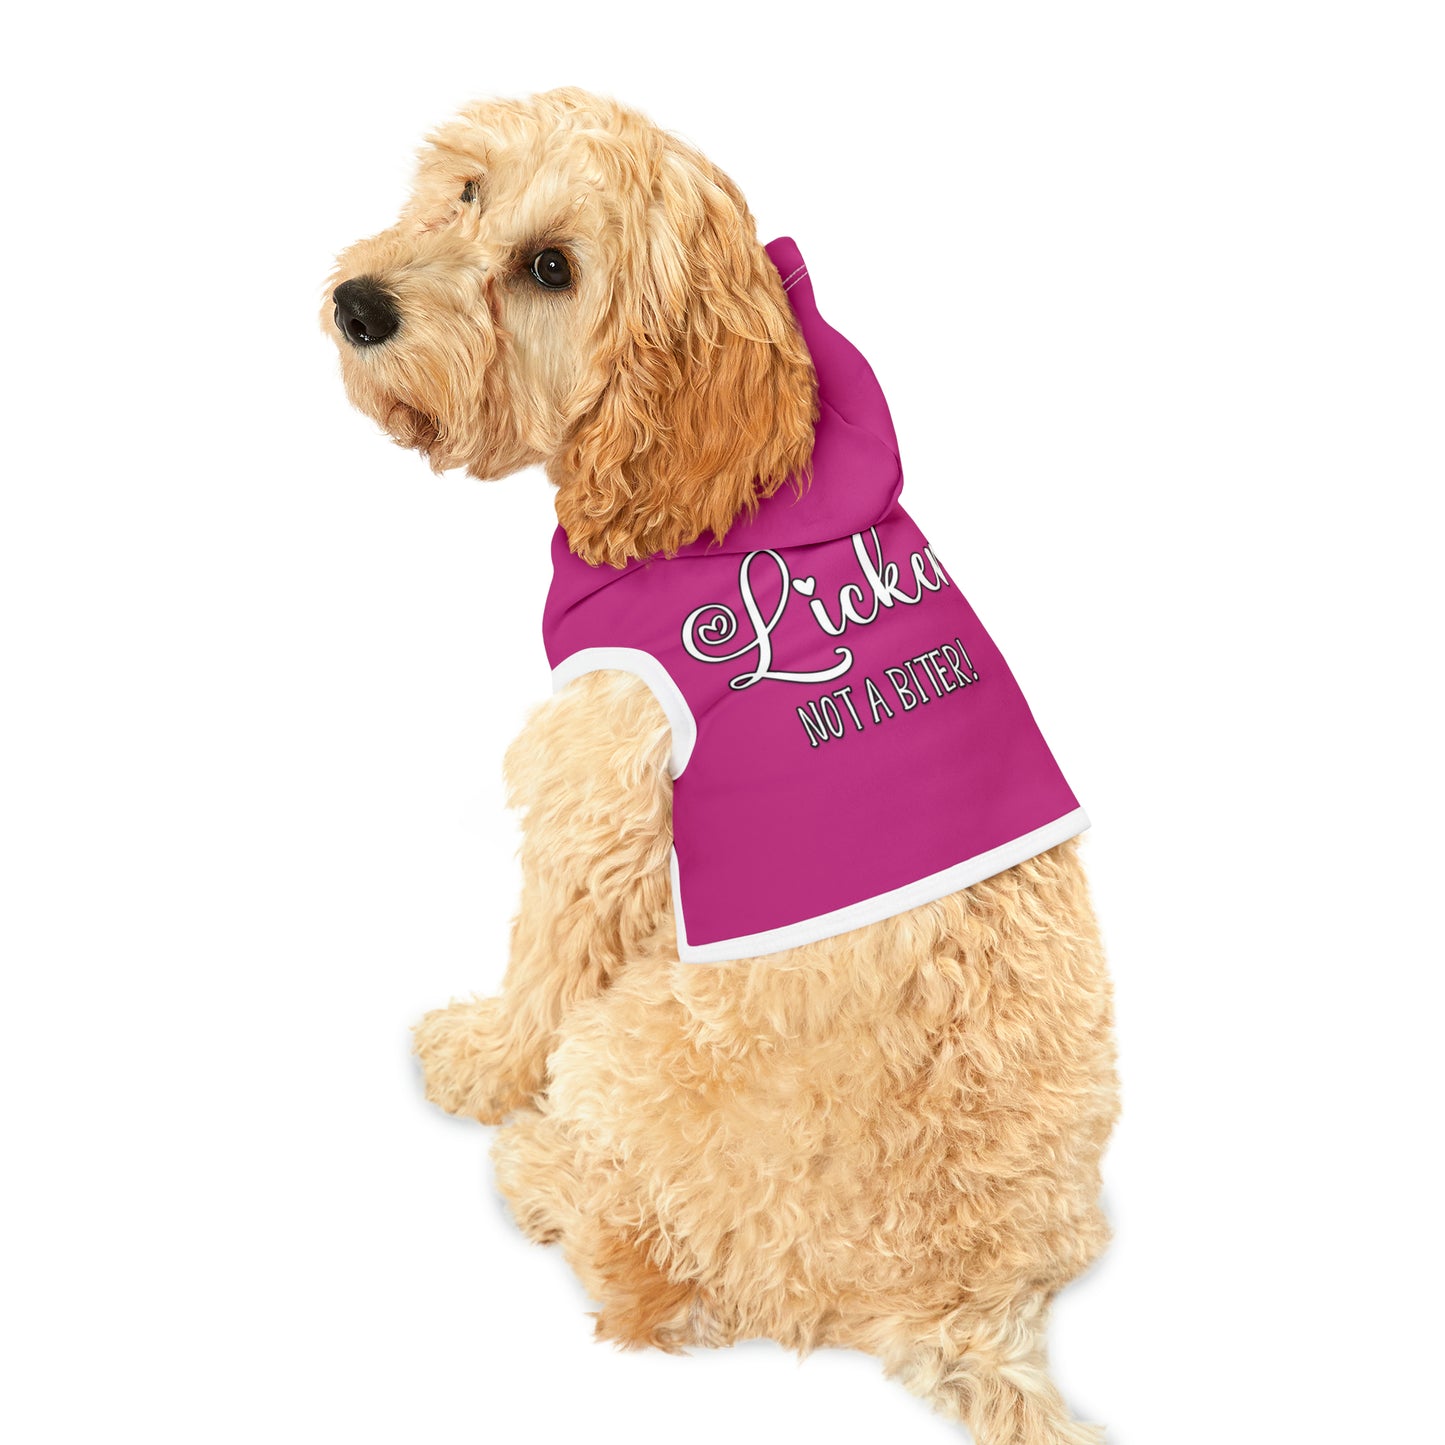 A cute dog wearing a pet hoodie with the message "I'm a Licker not a biter!". Pet Hoodie's Color is pink